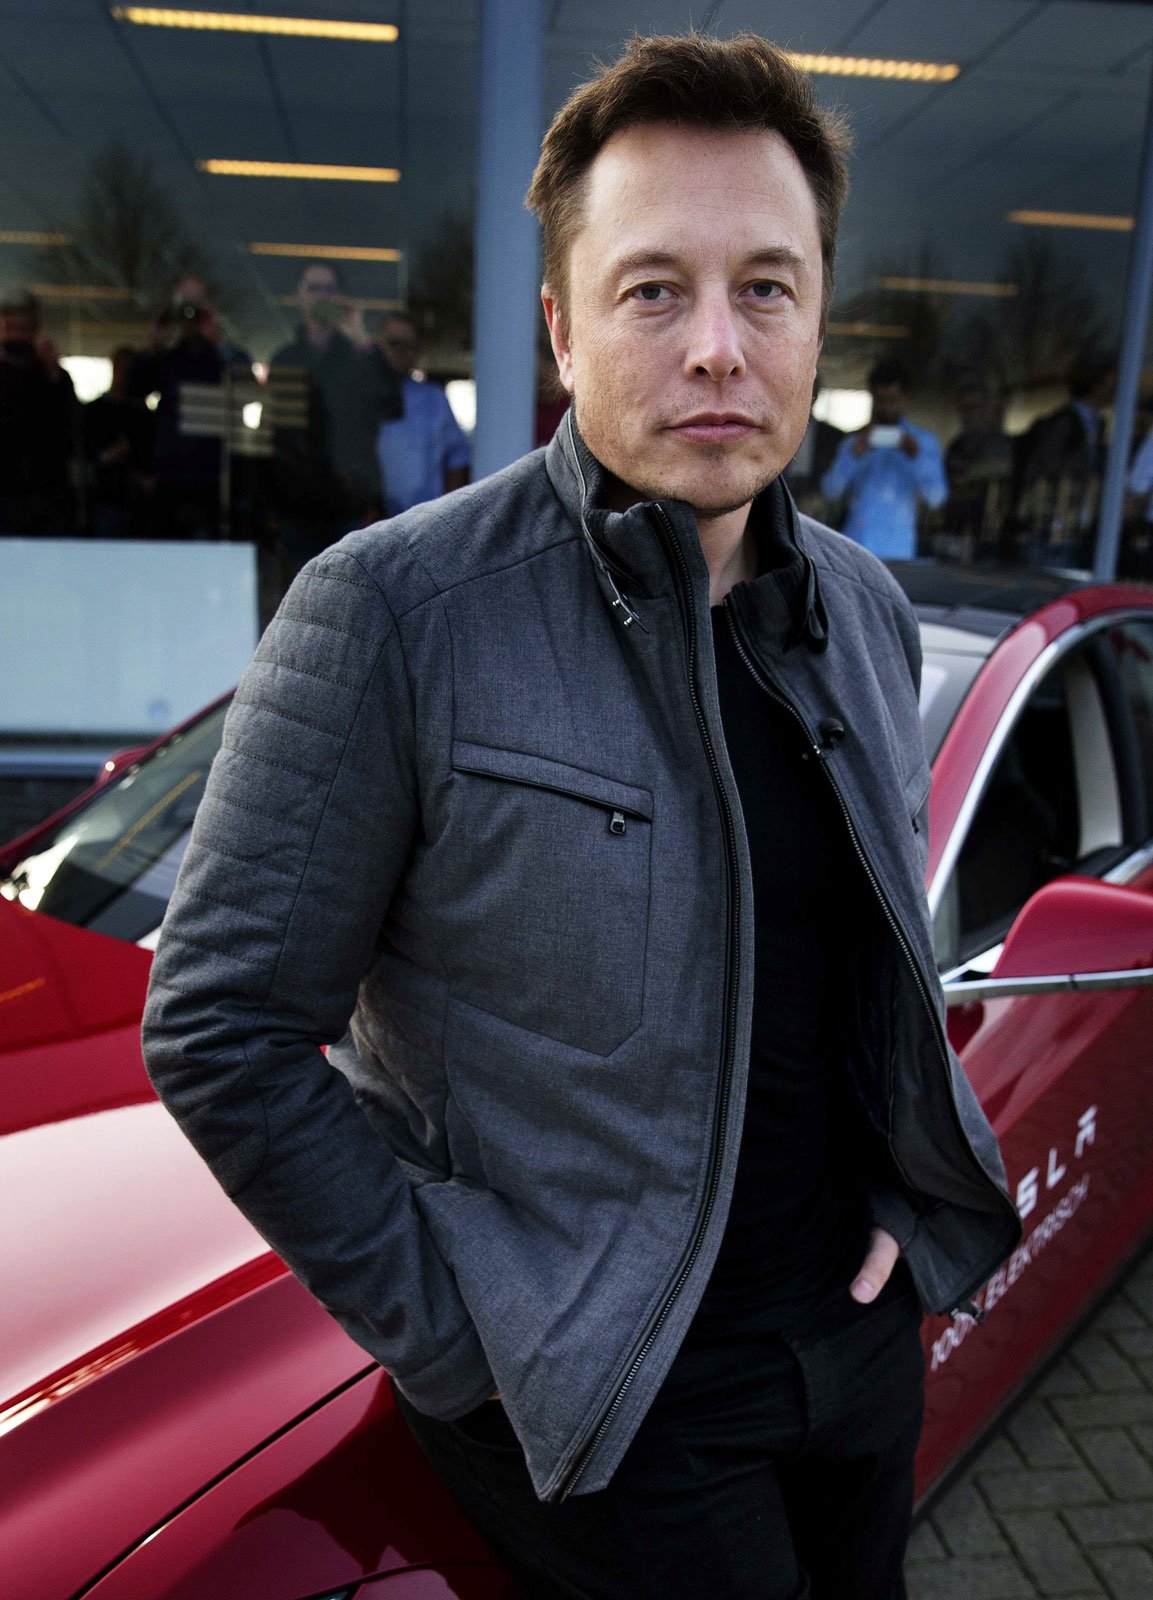 An in-depth look into Elon Musk's accomplishments